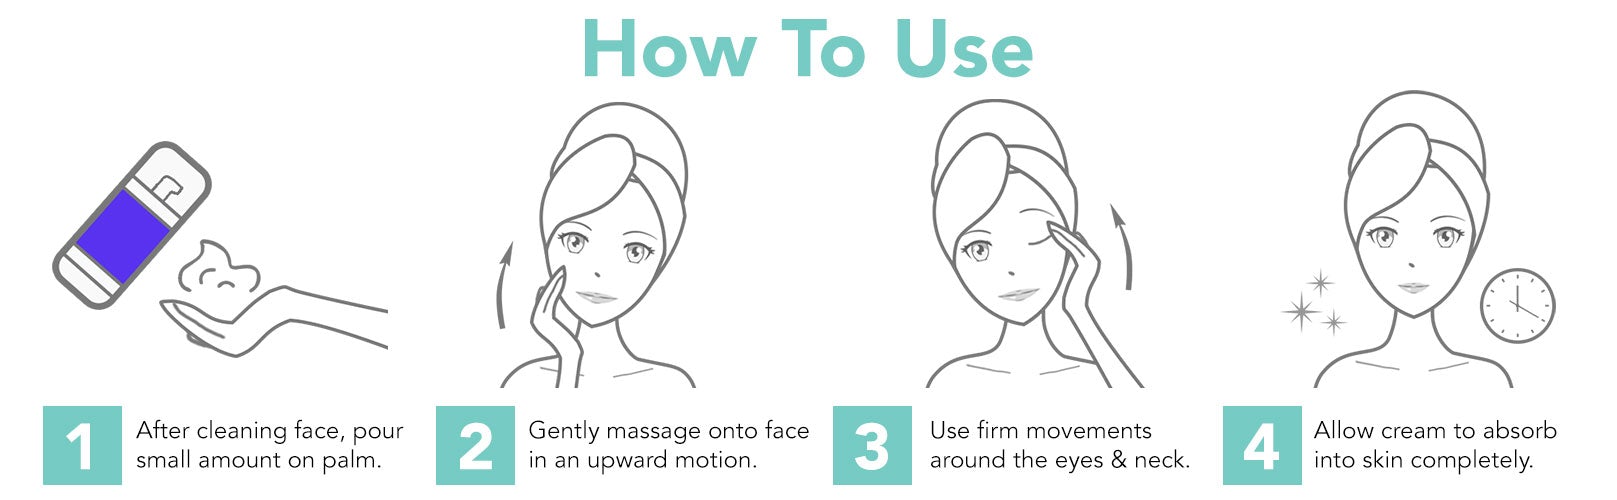 How to use moisturizer cream in an effective way